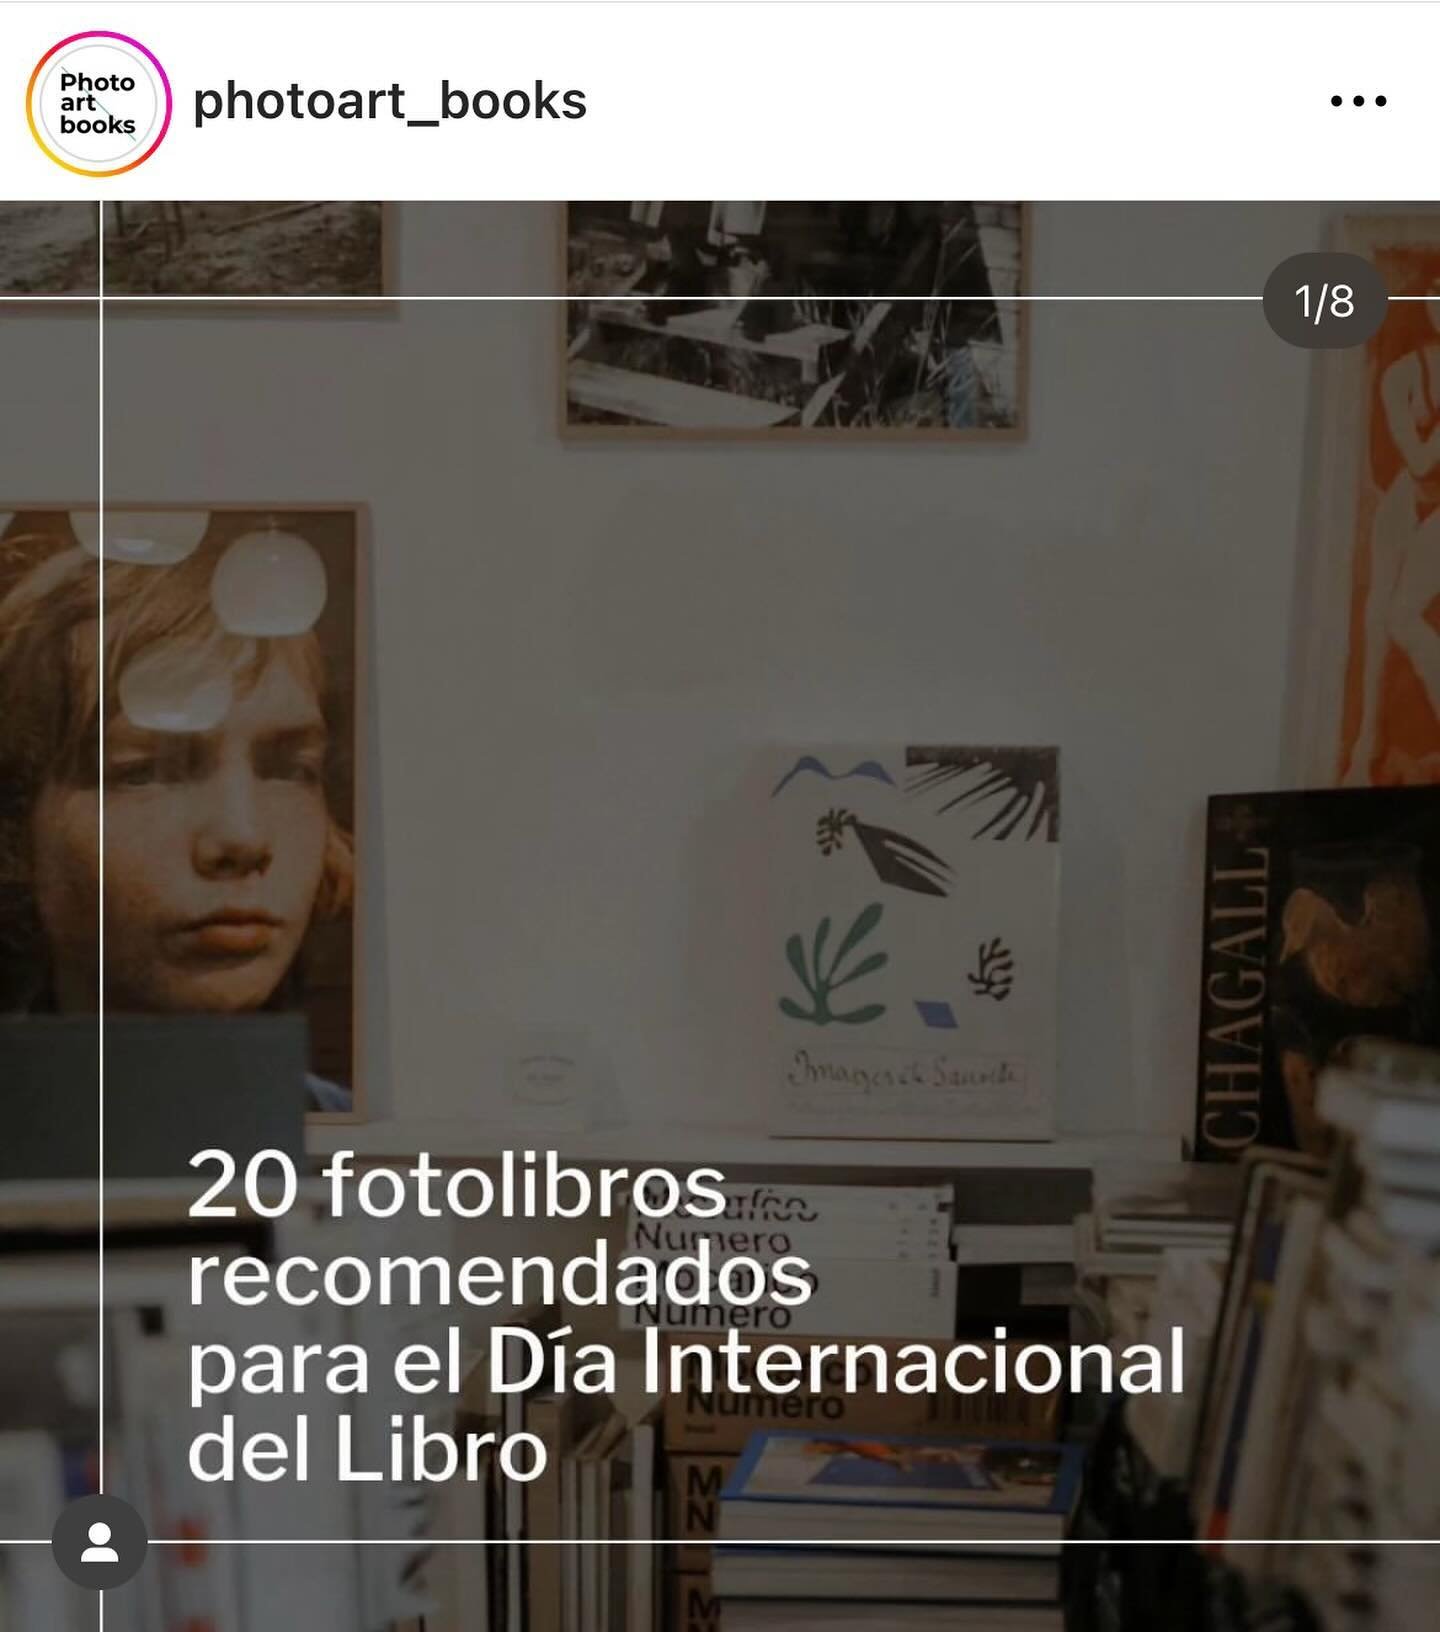 Very proud and honoured that &lsquo;Where the spirit meets bone&rsquo; is on the recommendation list of @photoart_books (Spain) &hearts;️🤩

#photoartbooks #photobooks #recommended #photobooklist #visualartist #photographer #innermovement